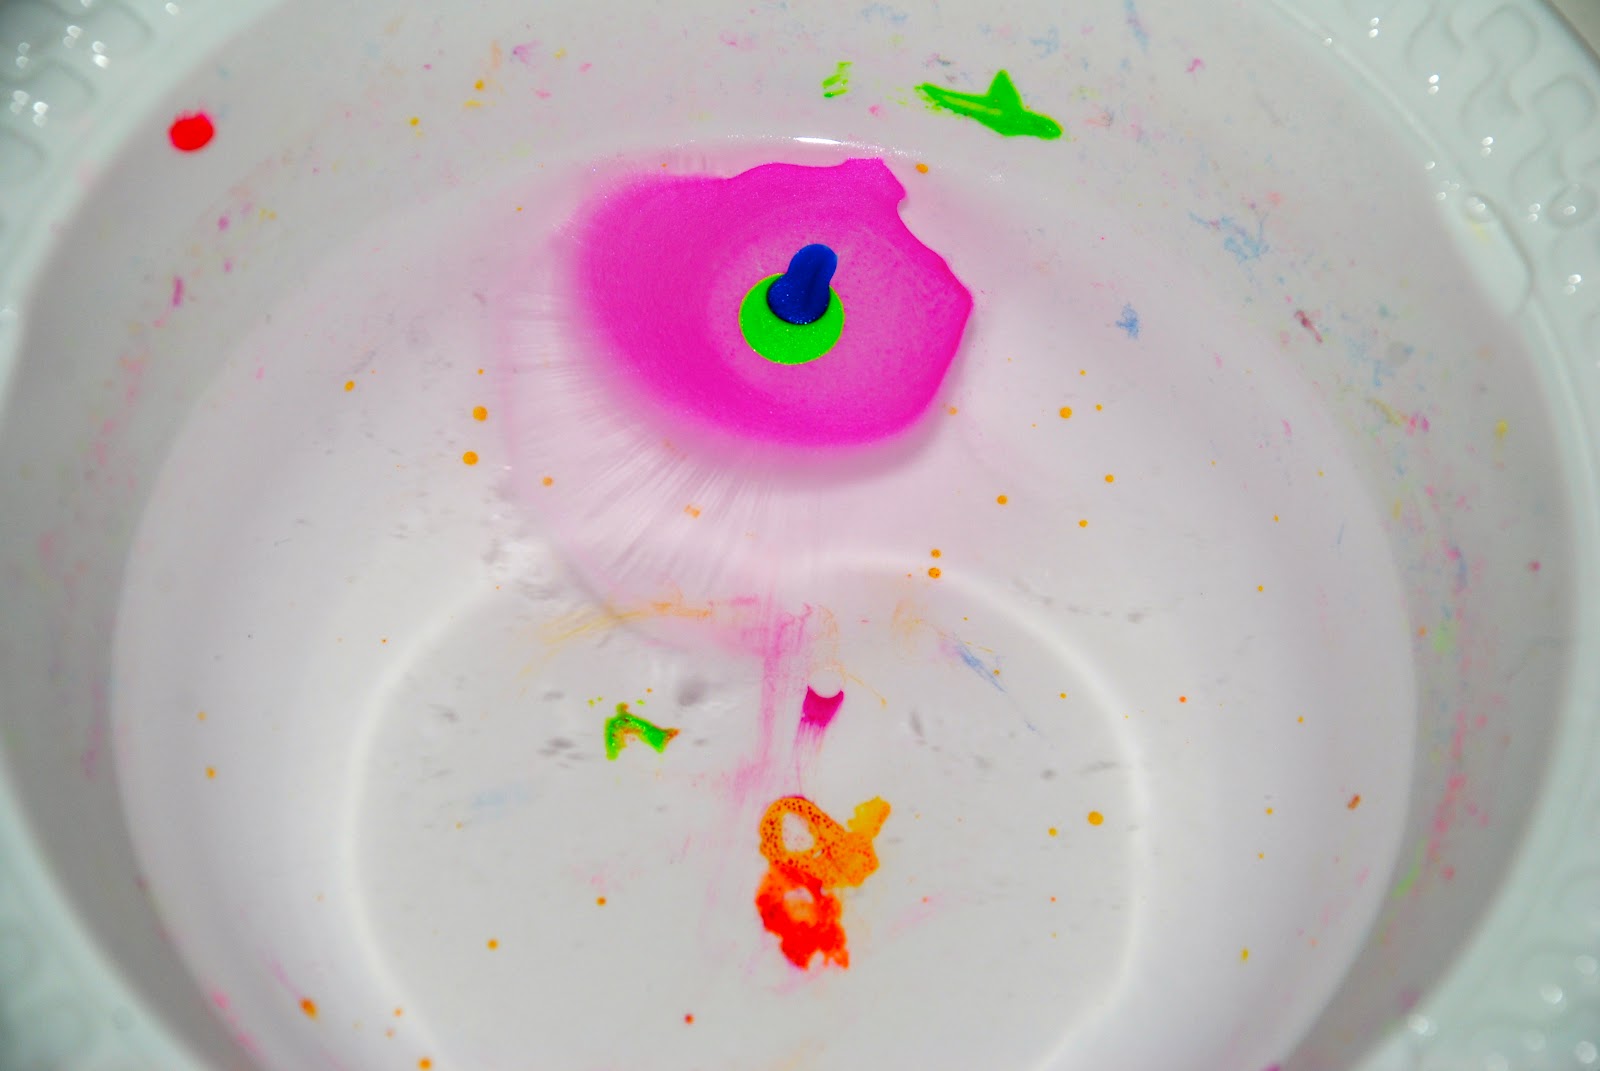 Make sure your nail polish spreads when you drop it in the water